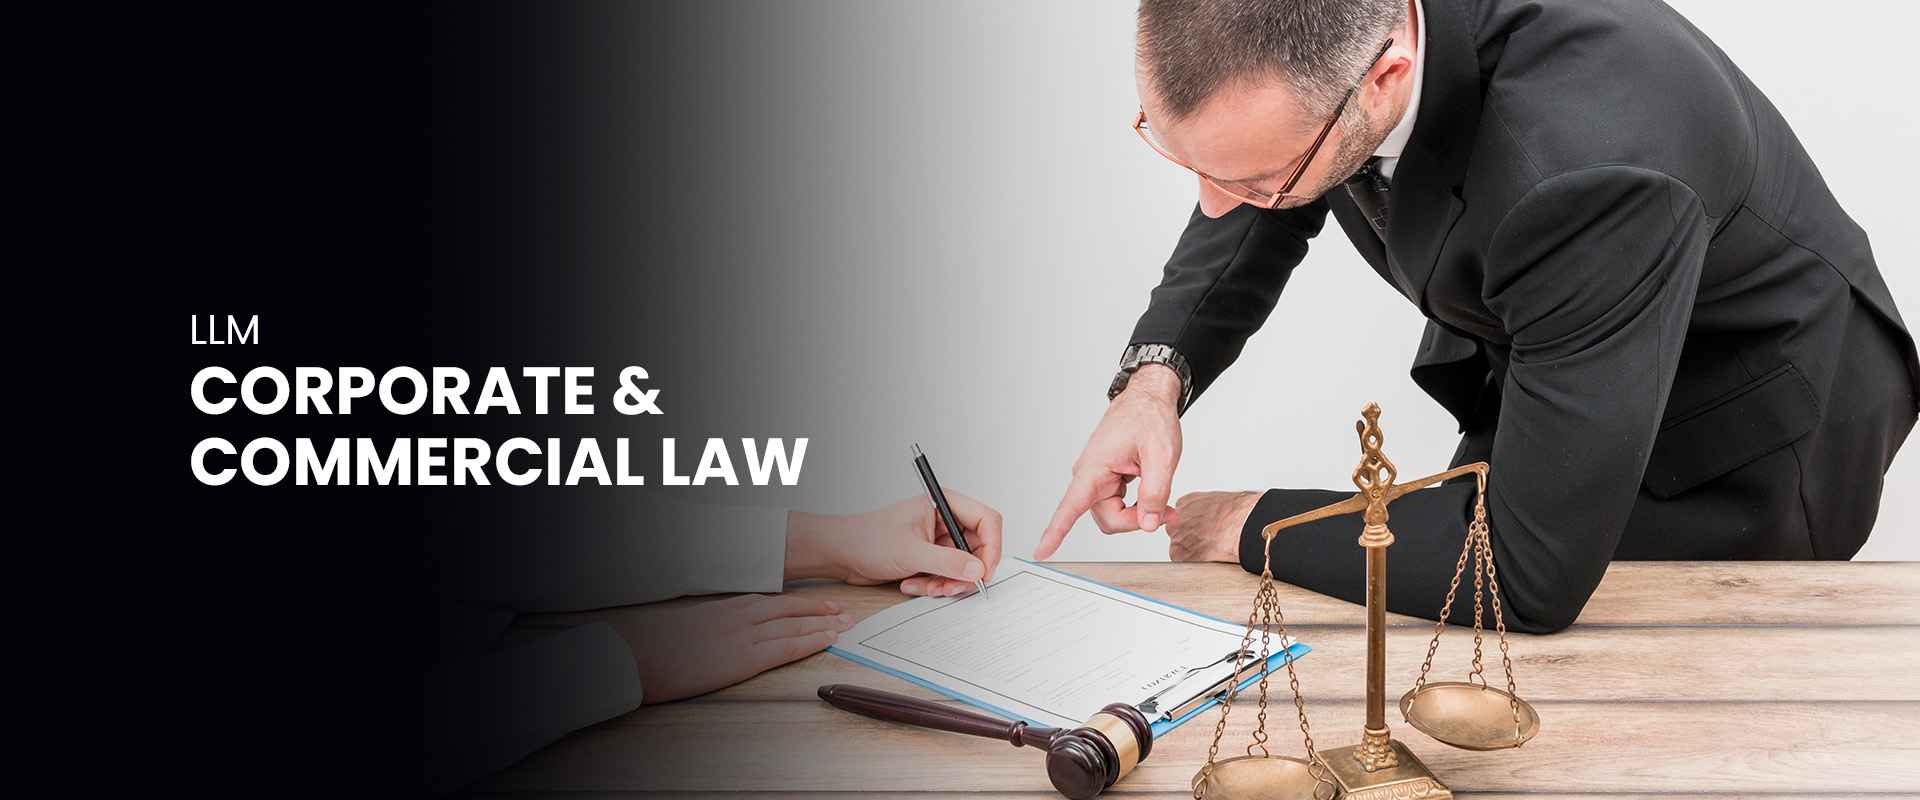 LLM In Corporate & Commercial Law Admissions